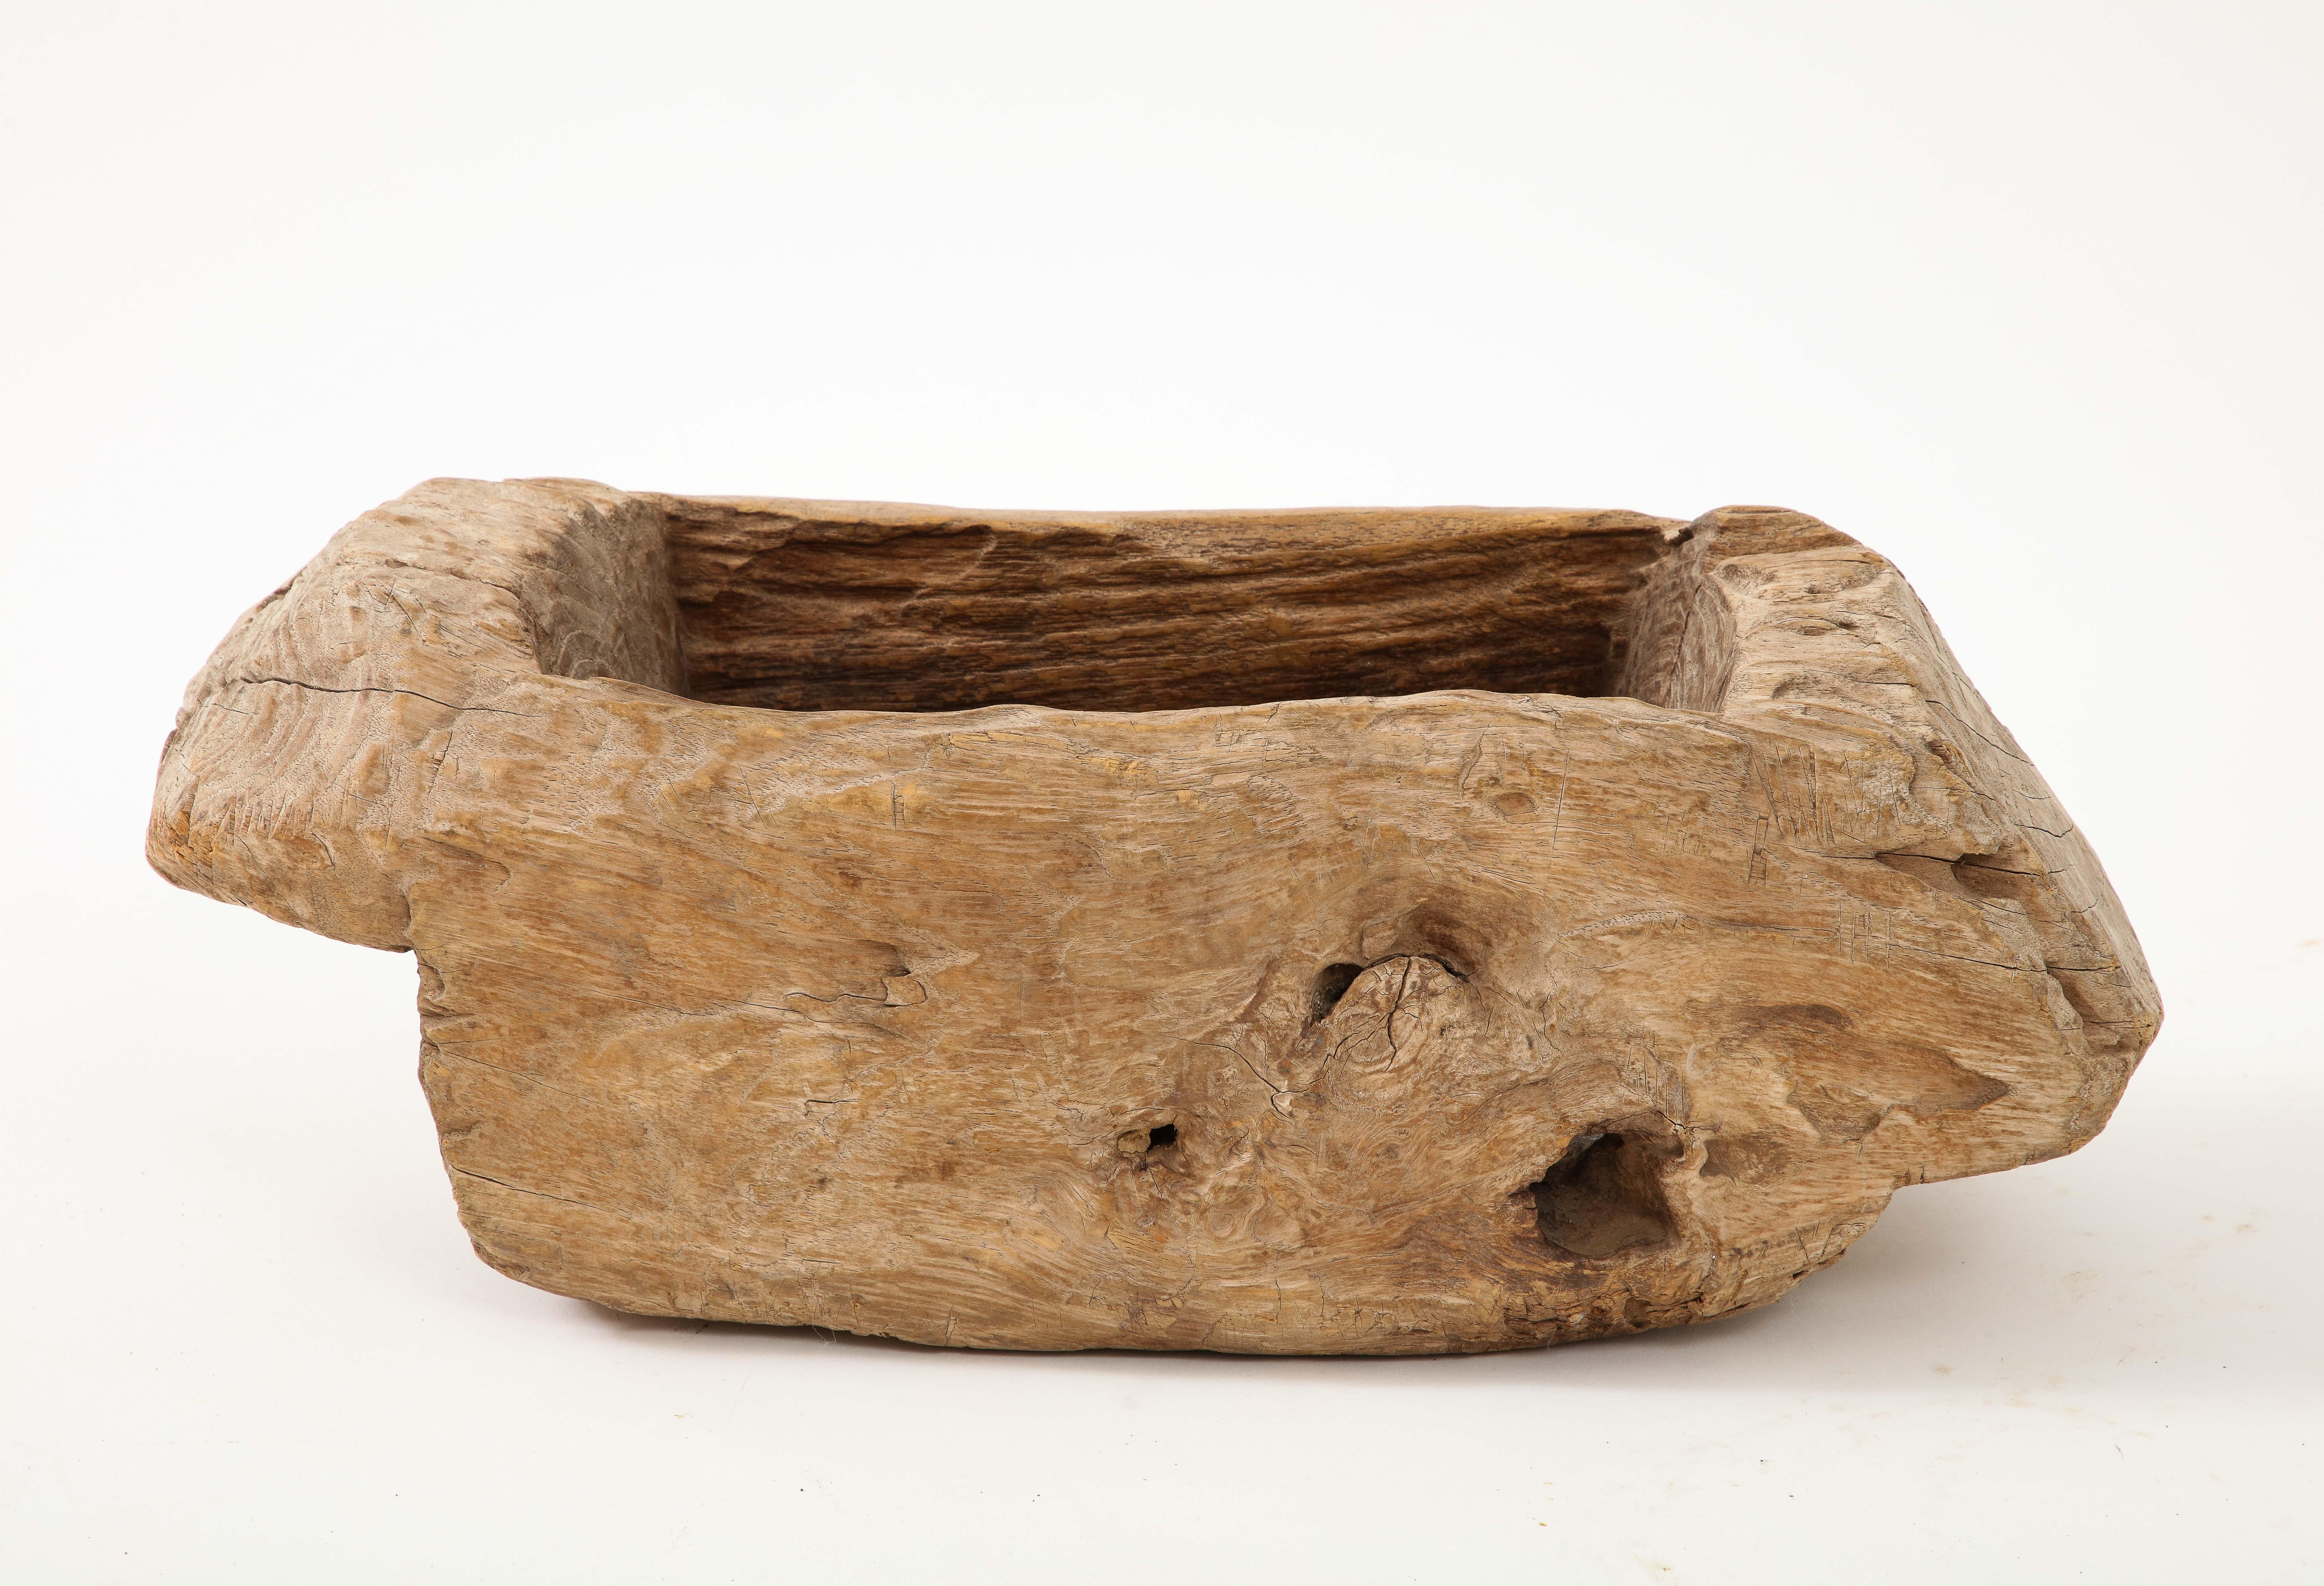 Rustic, Hand-carved Wood Vessel, France, 20th C.

